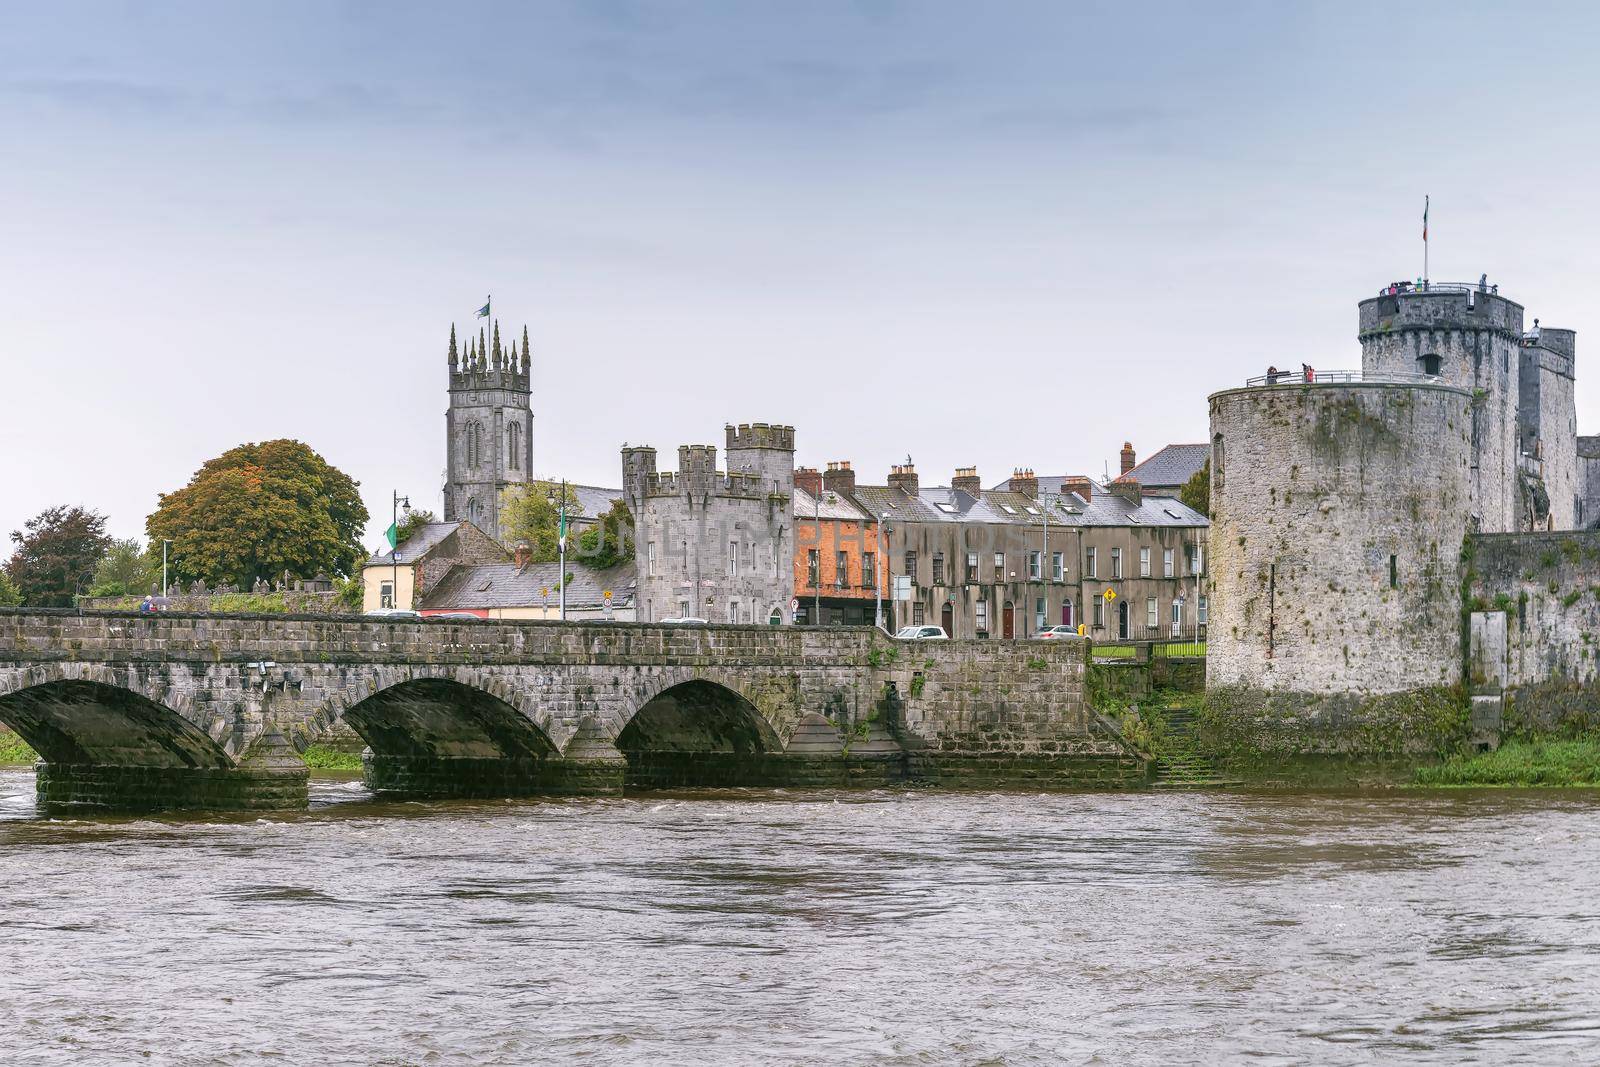 View of King John's Castle and bridge from Shannon river, Limerick, Ireland